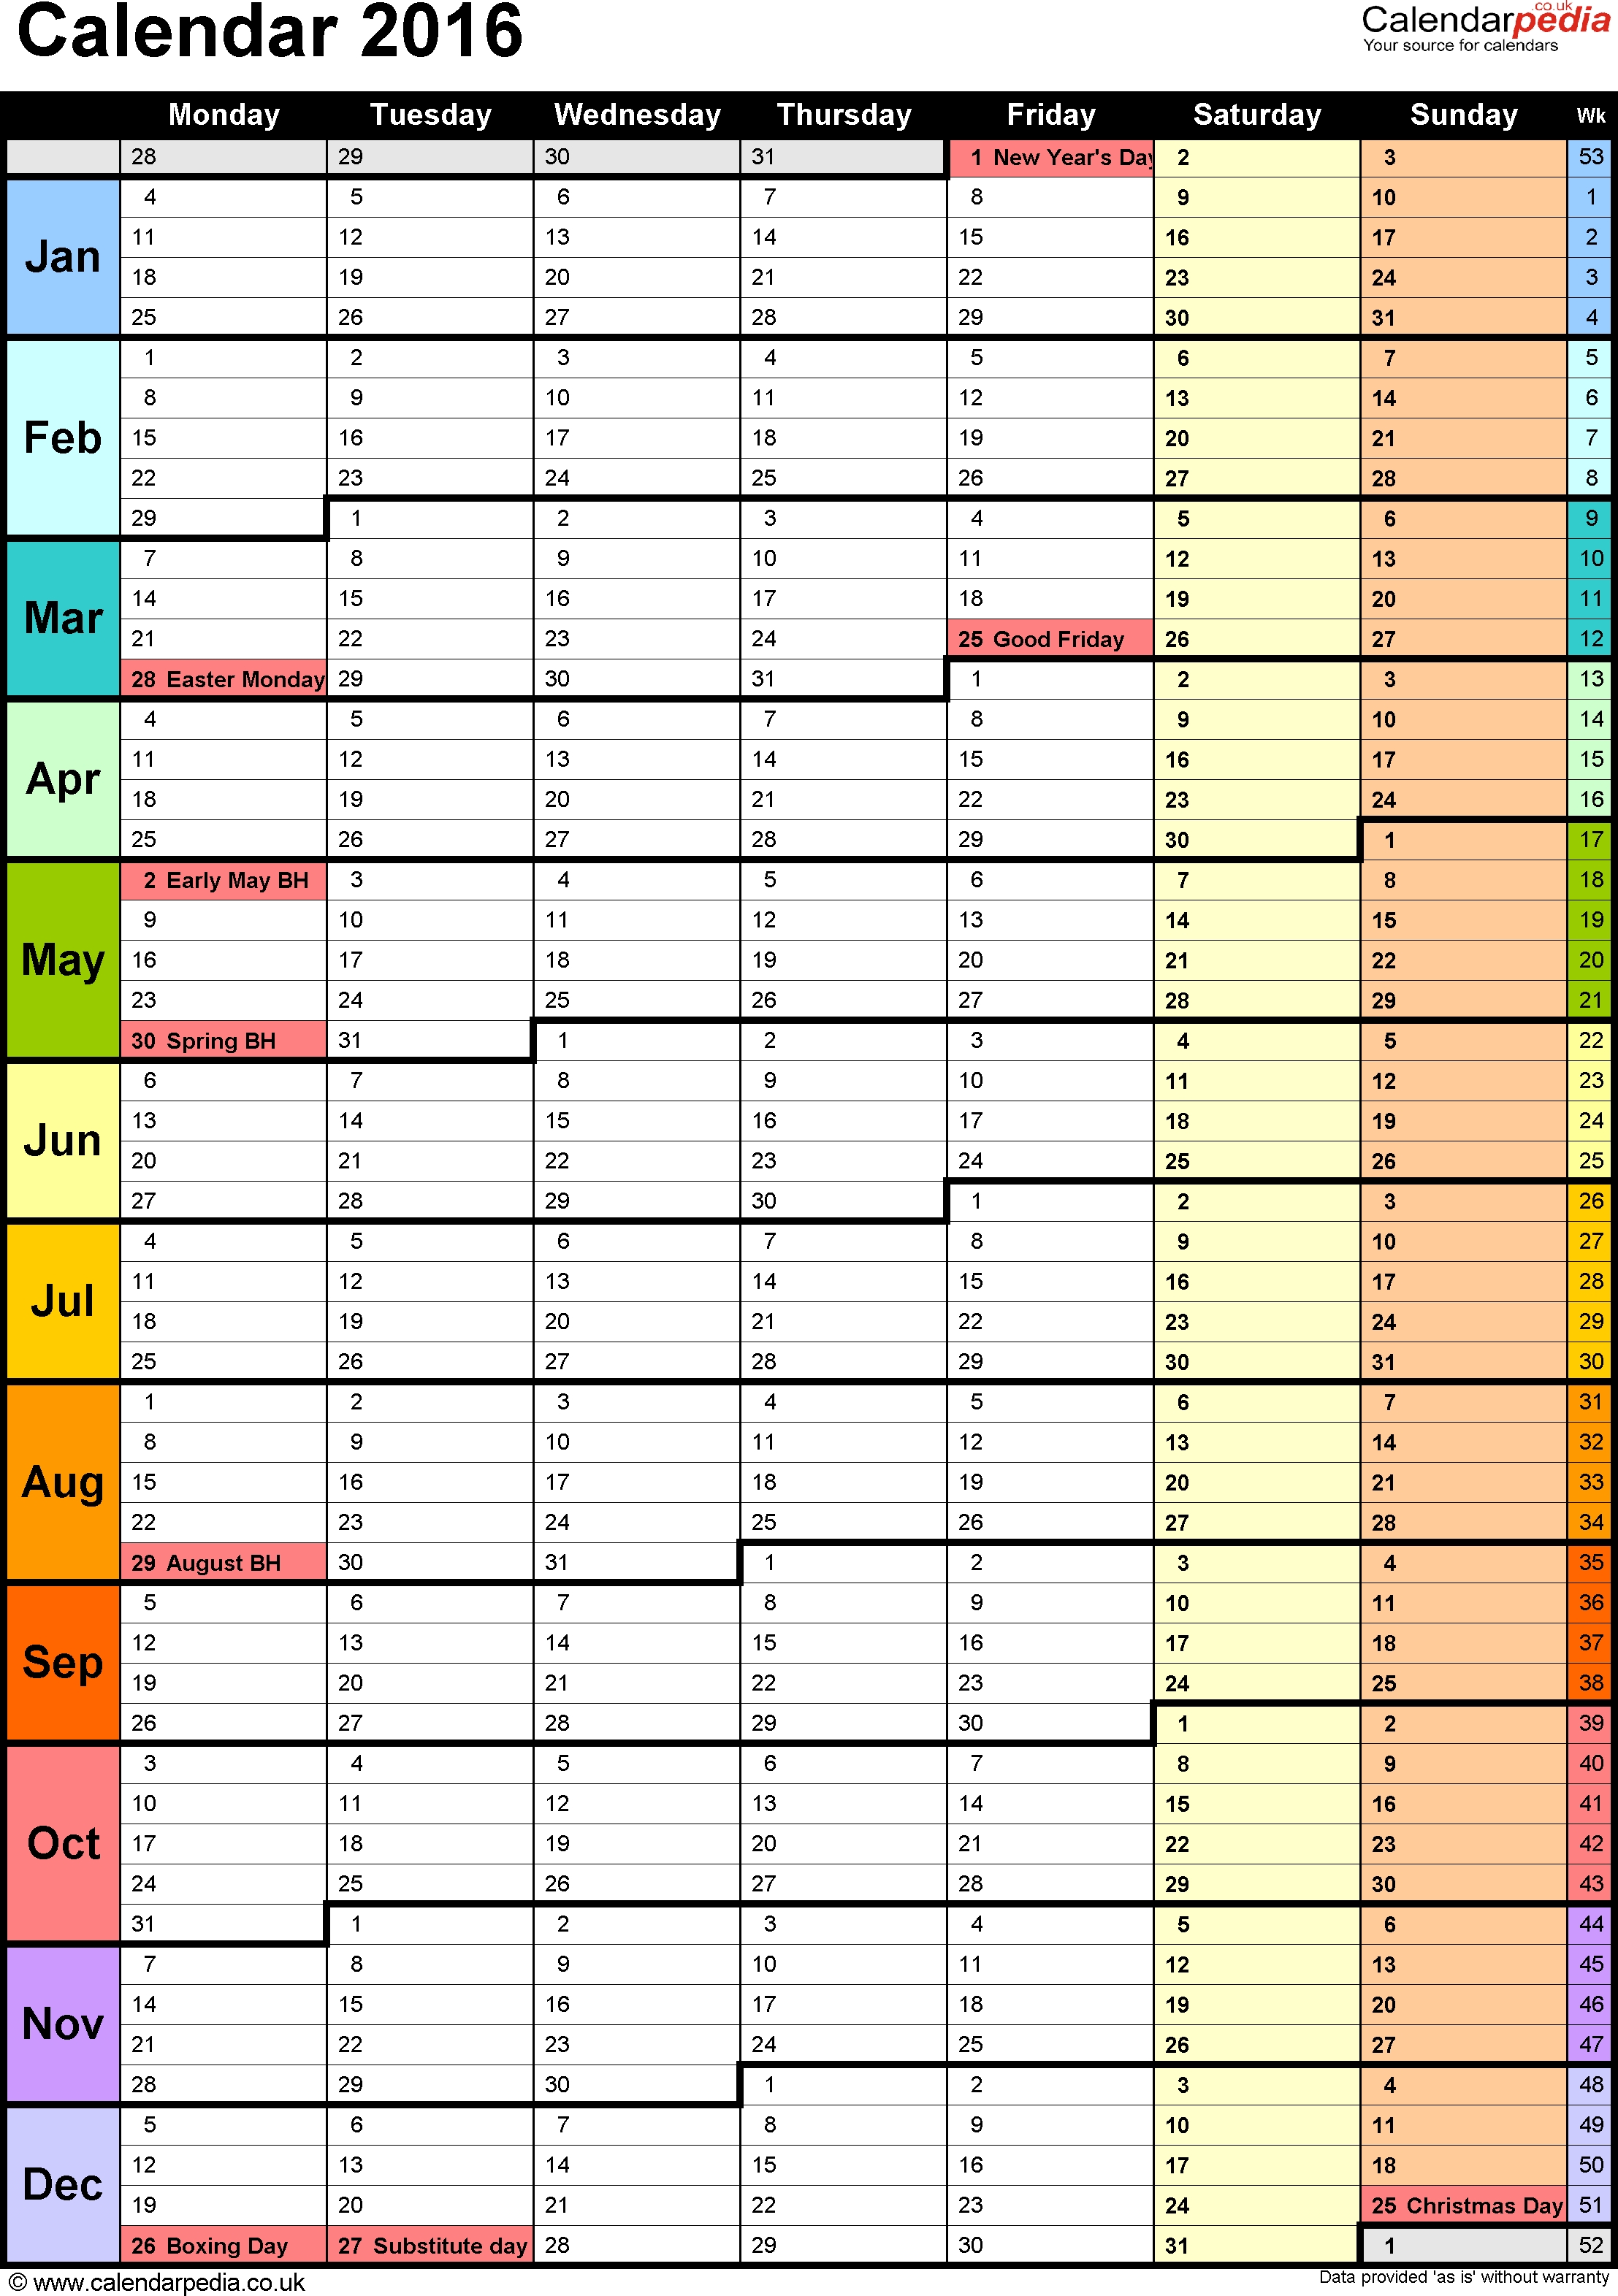 Template 15: Yearly Calendar 2016 As Pdf Template, Portrait